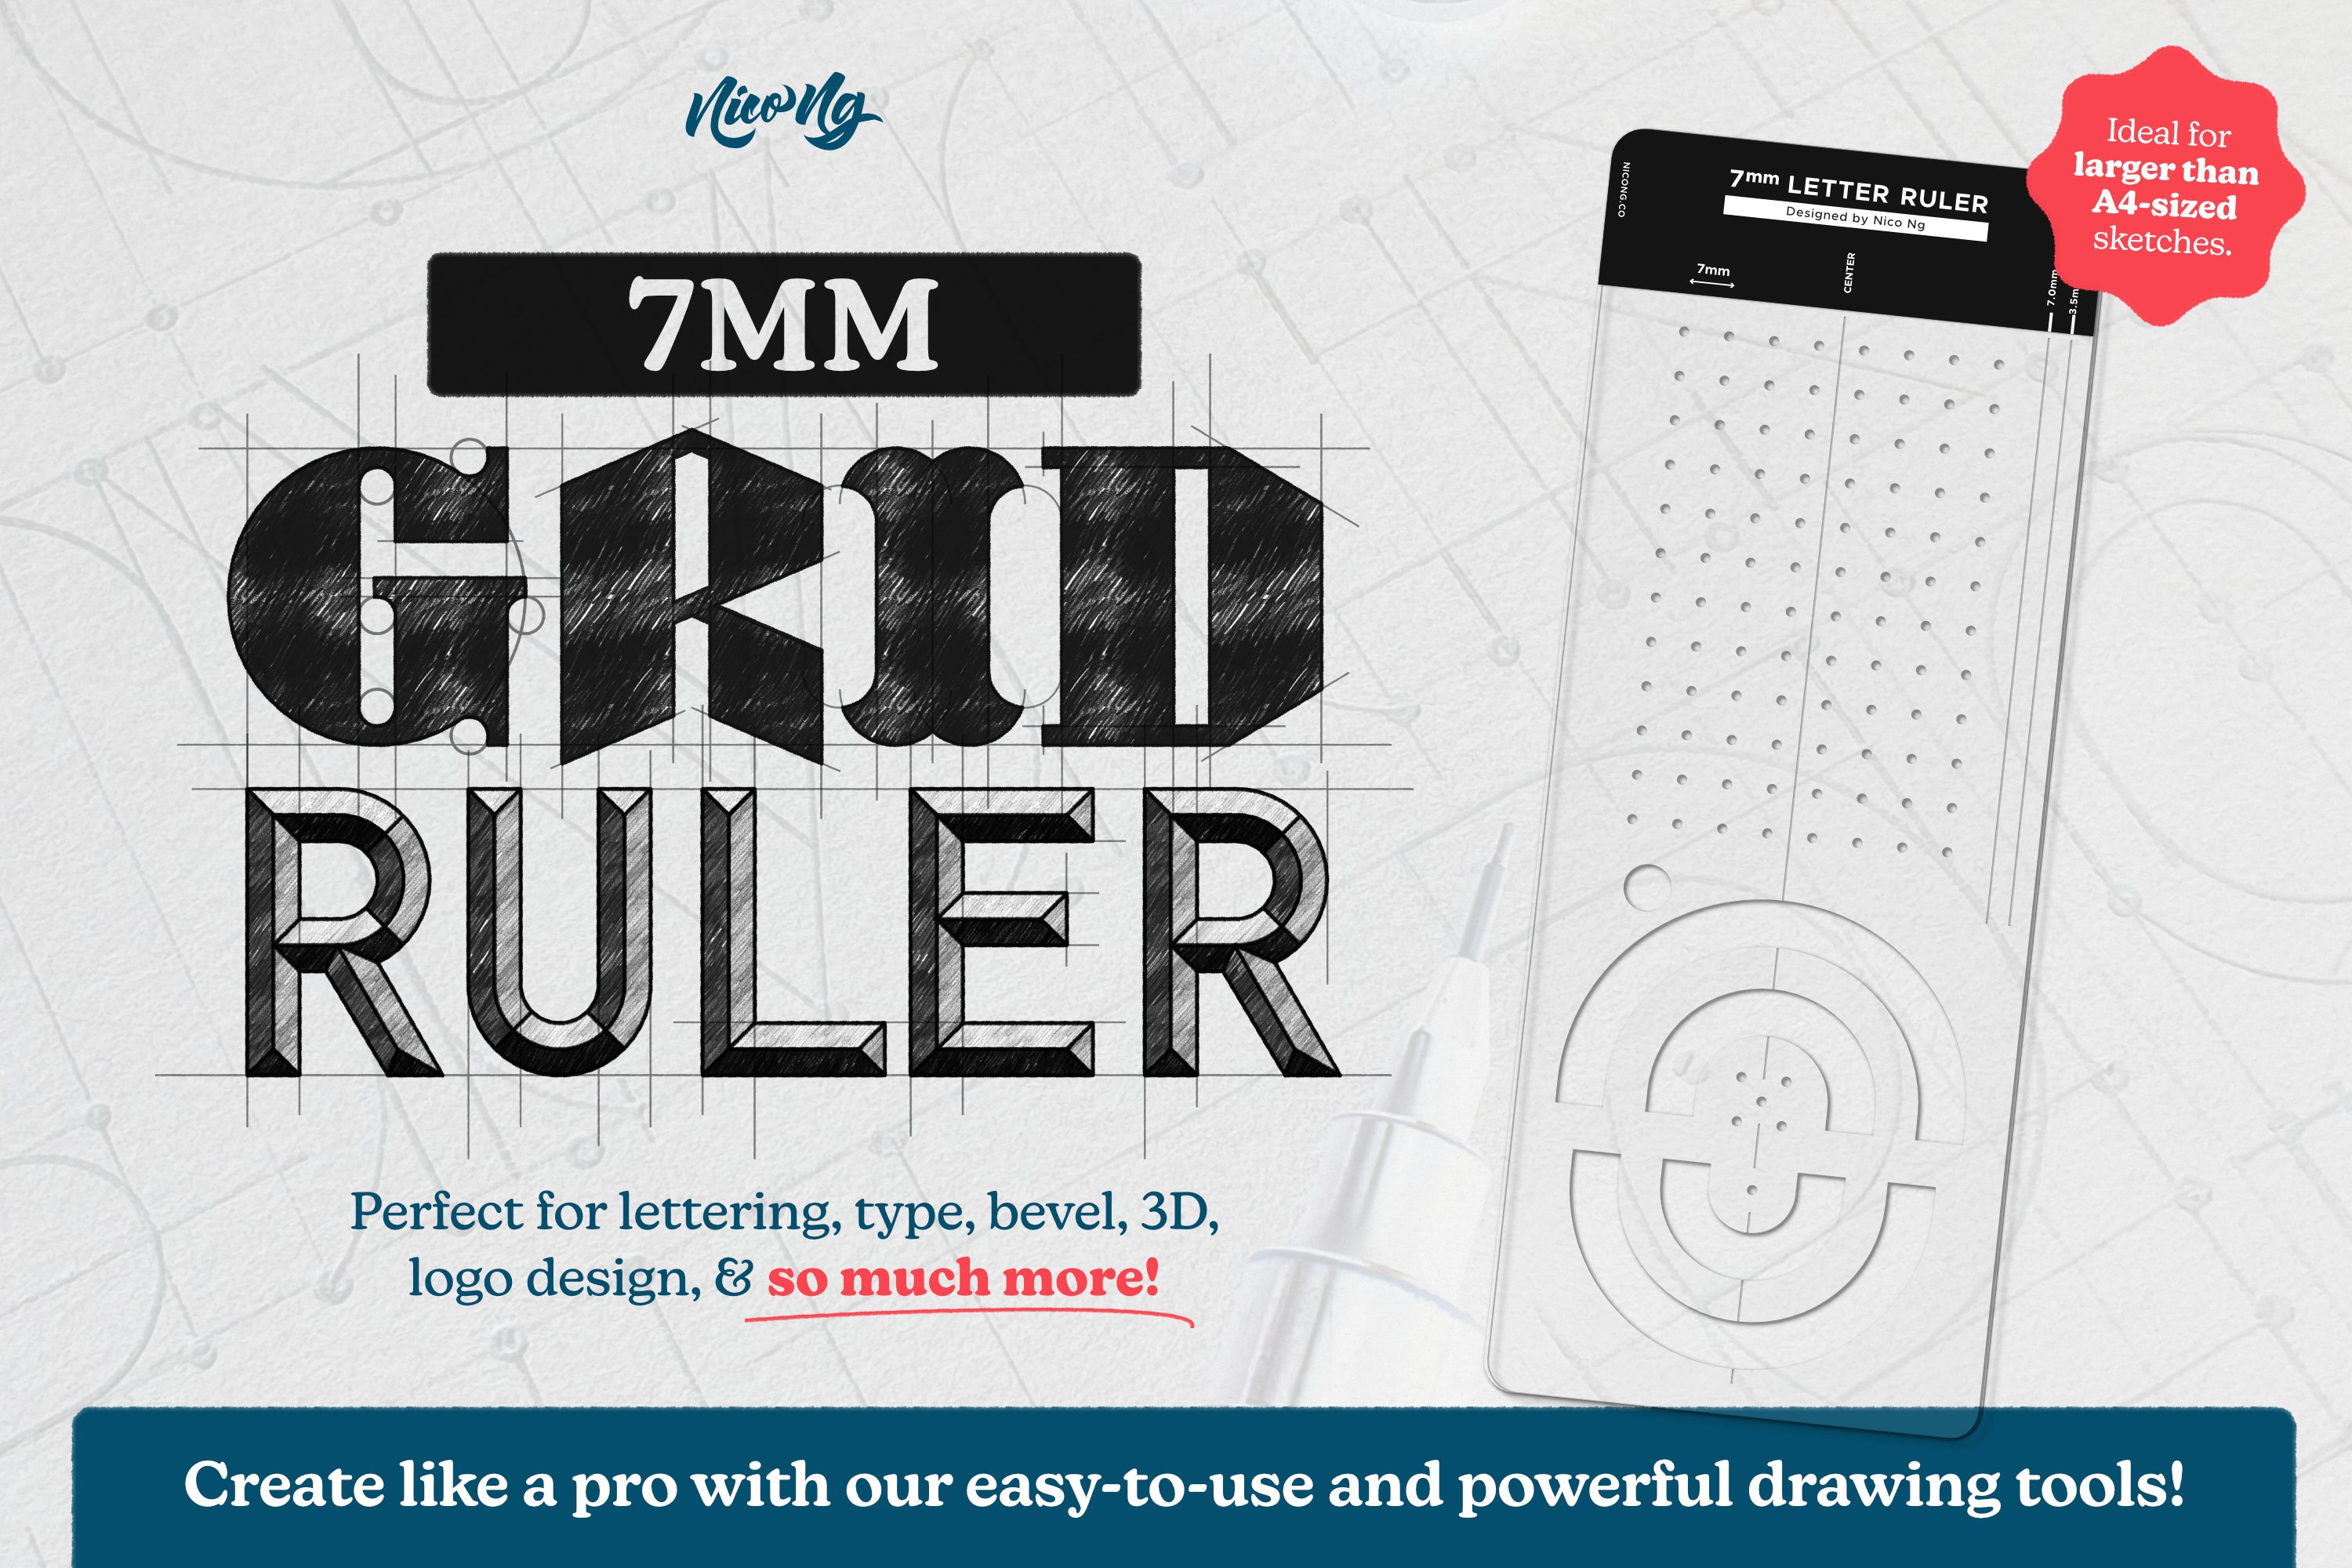 Free Today-ruler with your own text • Bigrell Design